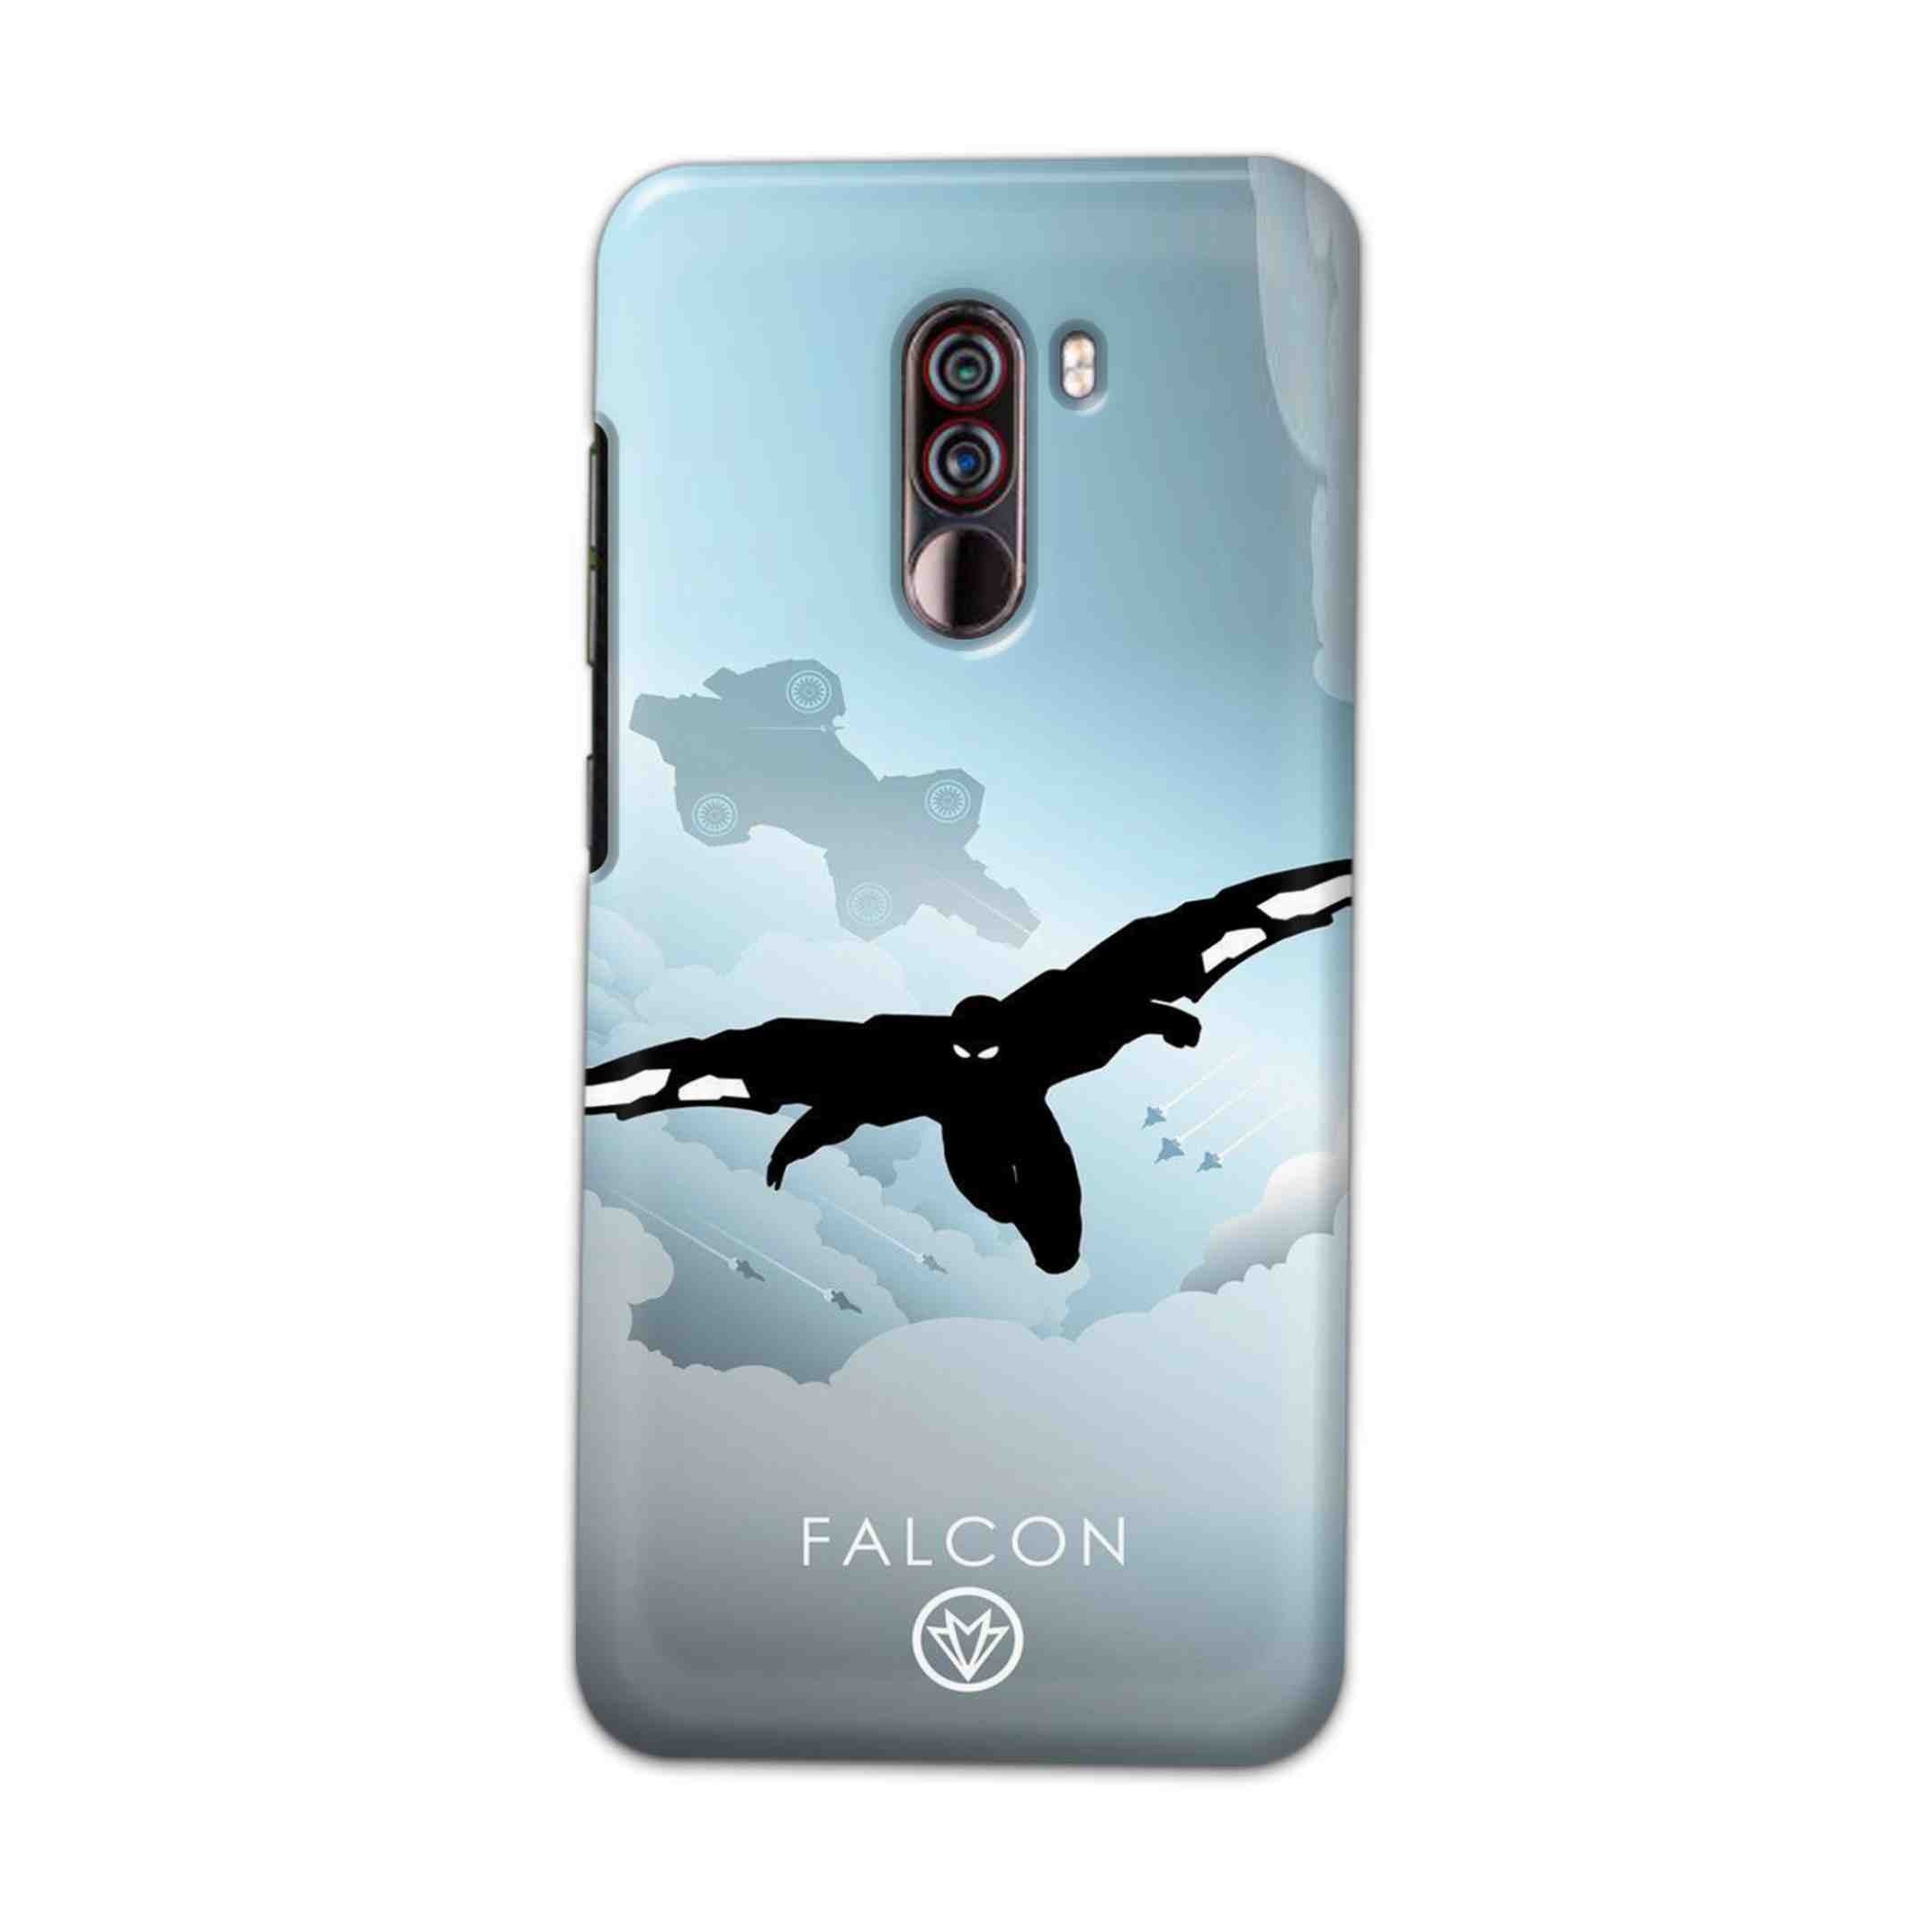 Buy Falcon Hard Back Mobile Phone Case Cover For Xiaomi Pocophone F1 Online